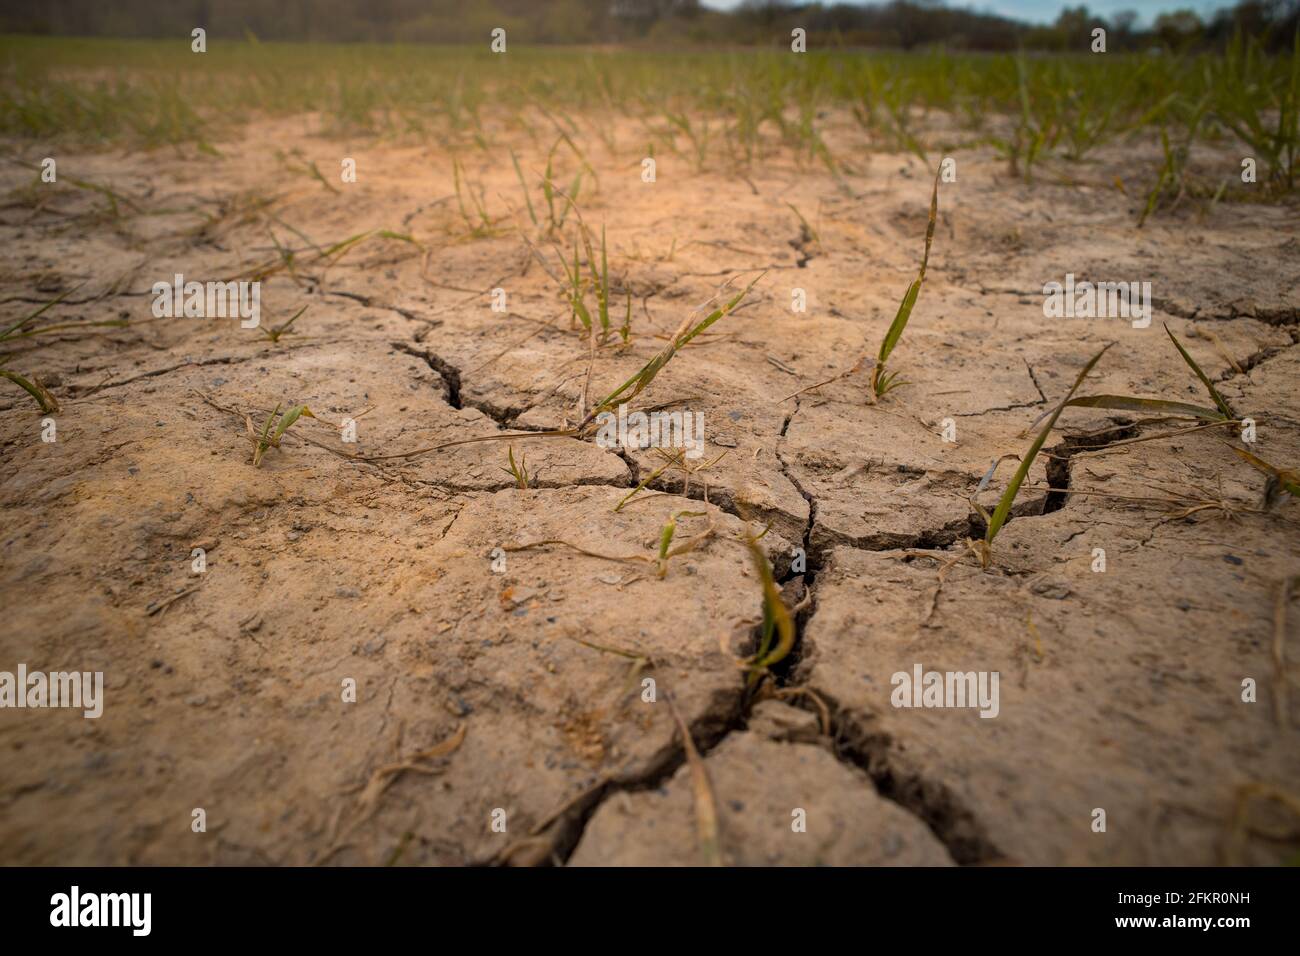 lack of rain causing cracked earth and failed crops on the farm global warming issues Stock Photo